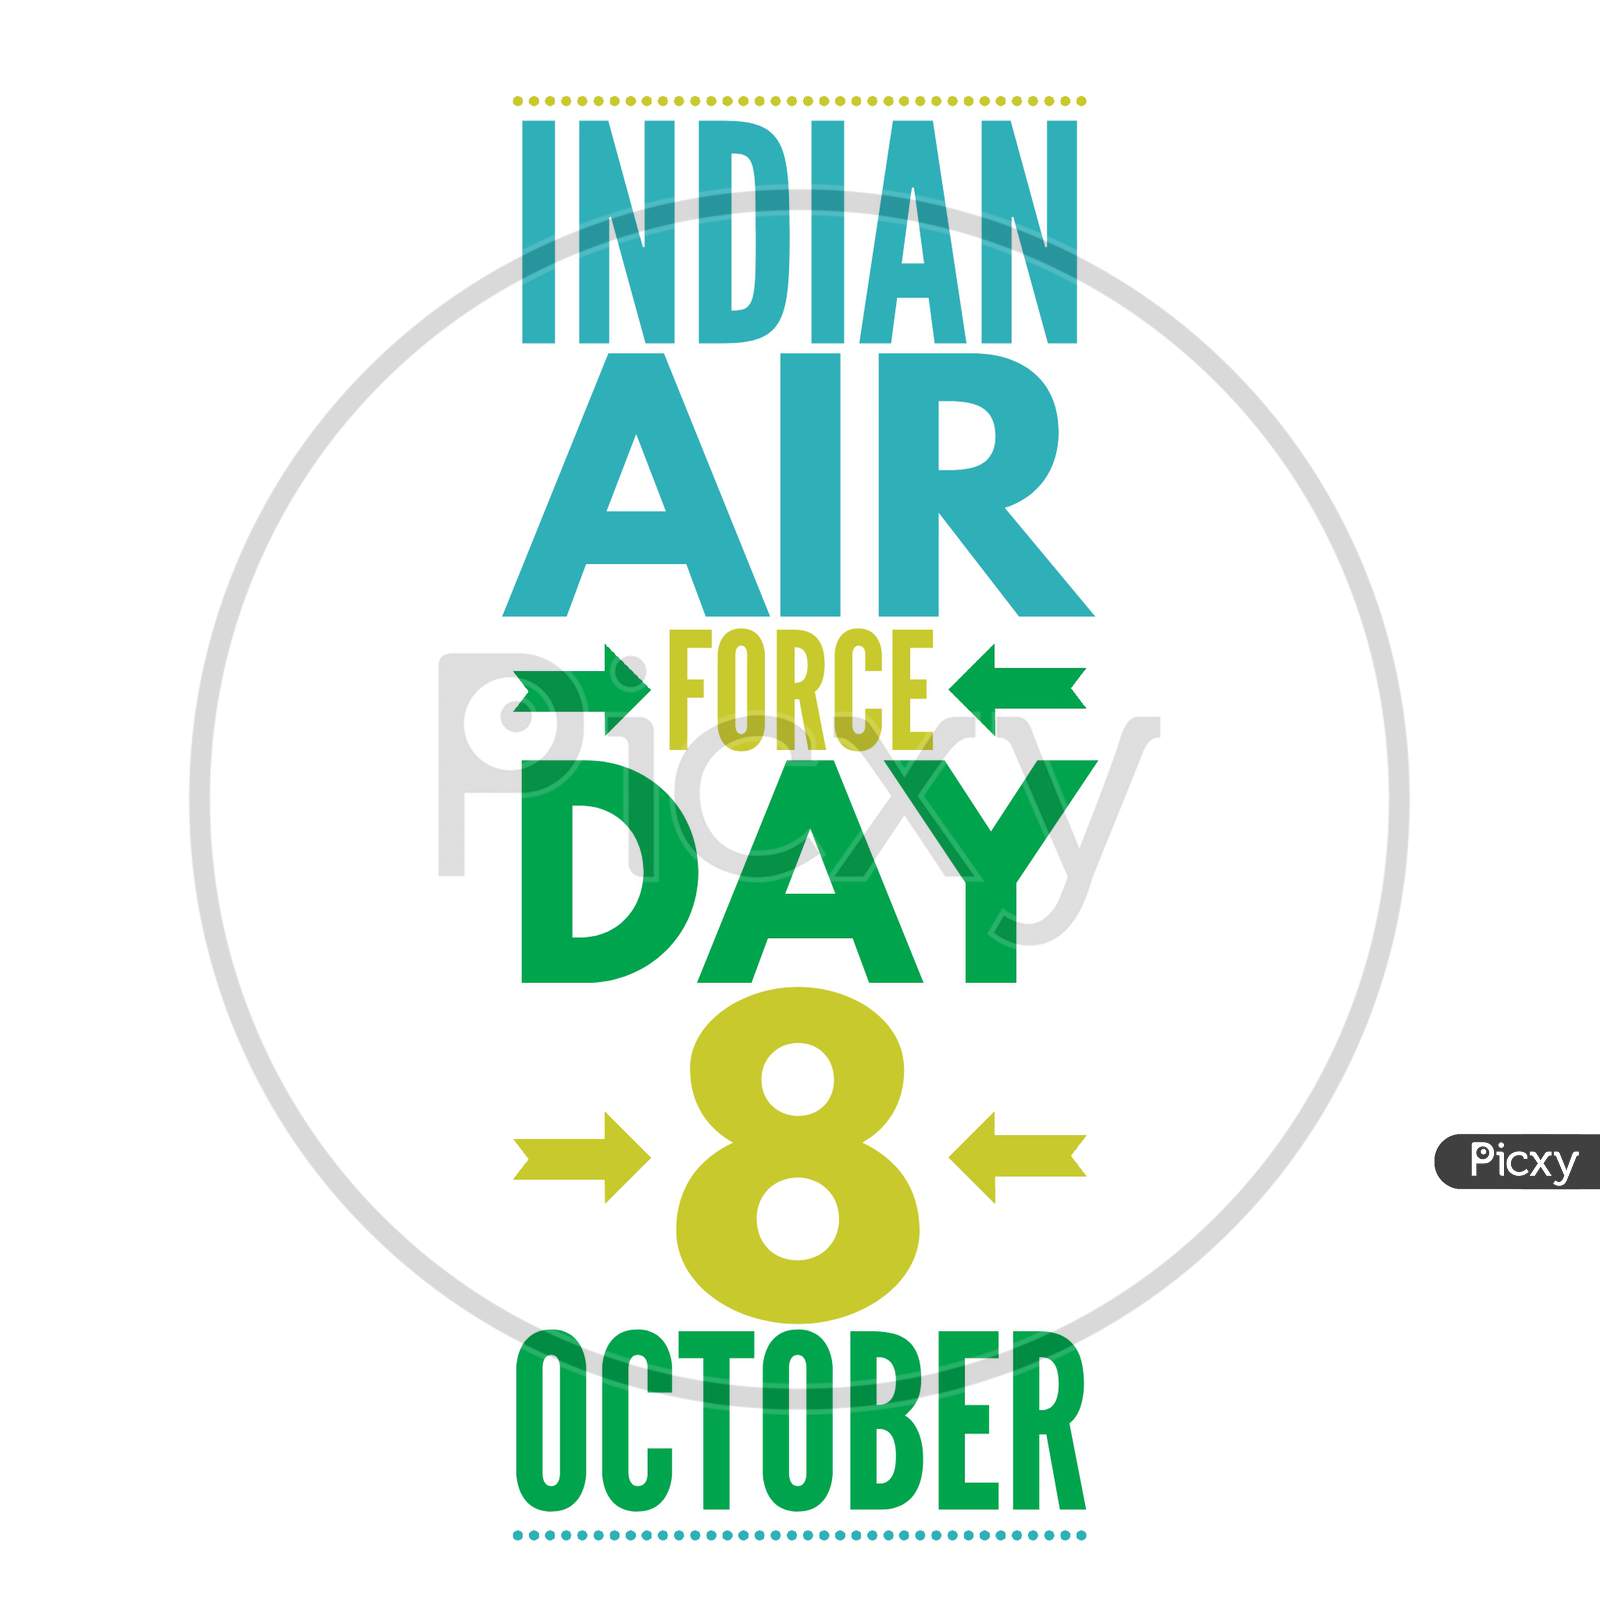 Image With Text "Indian Air Force Day" On White Background.